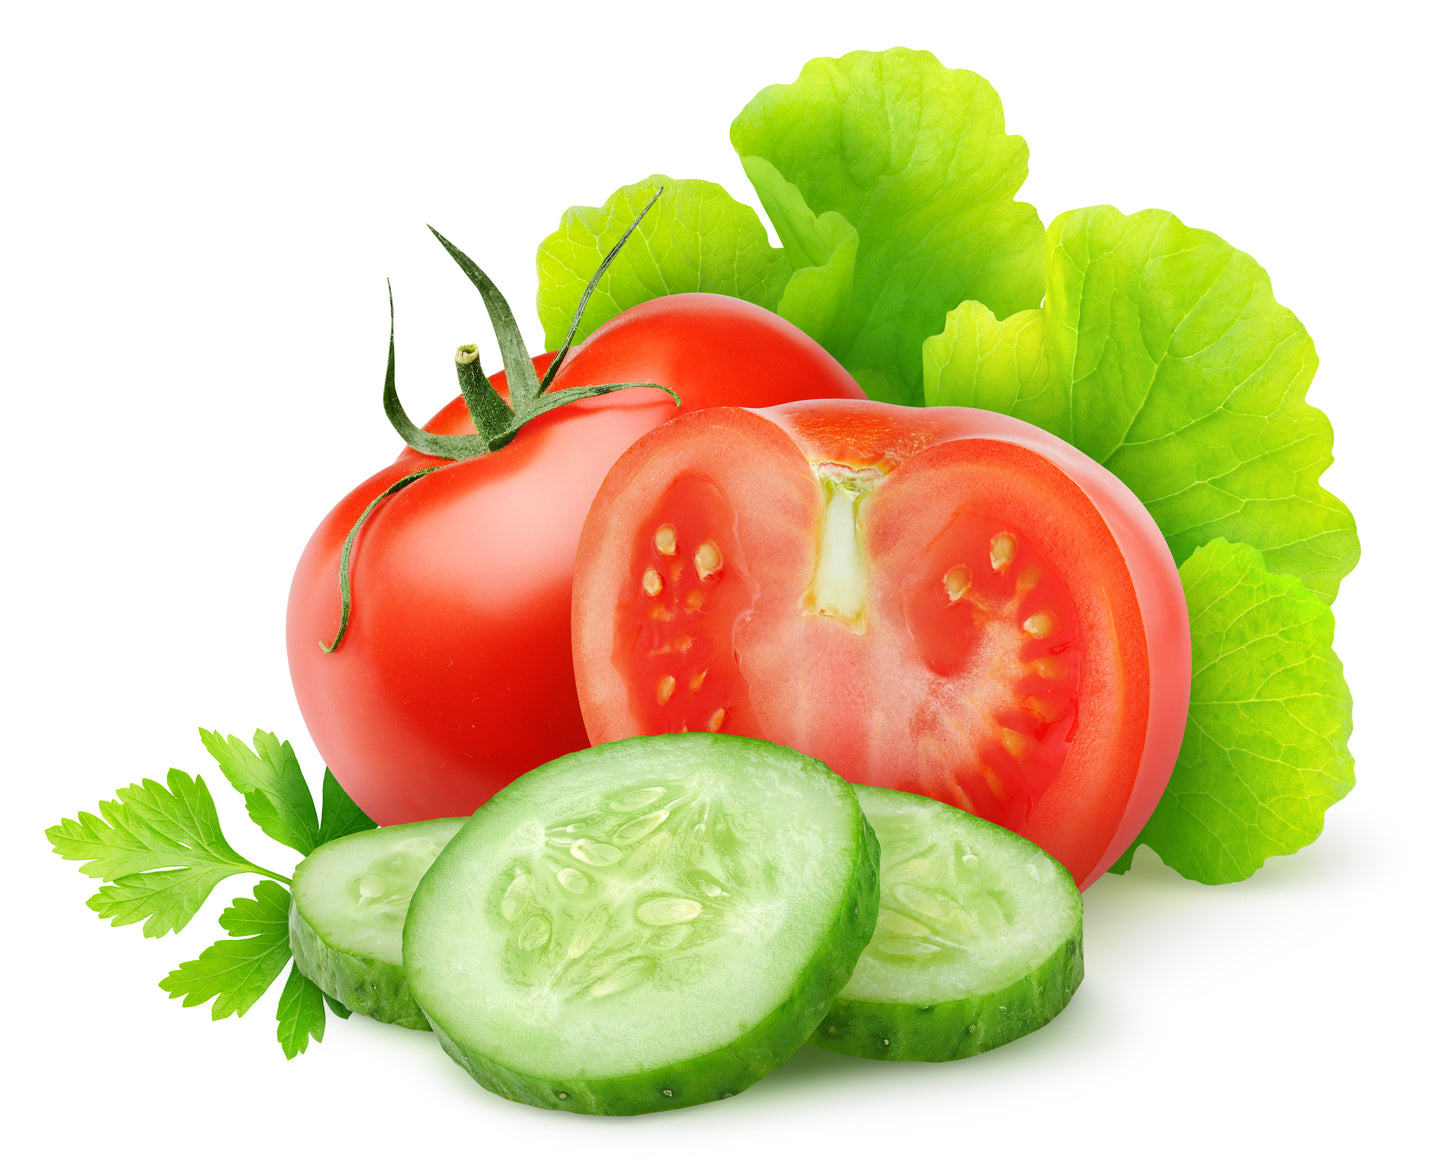 Tomato and Cucumber Combo Pack - 6 x Full Plants in 9cm Pots